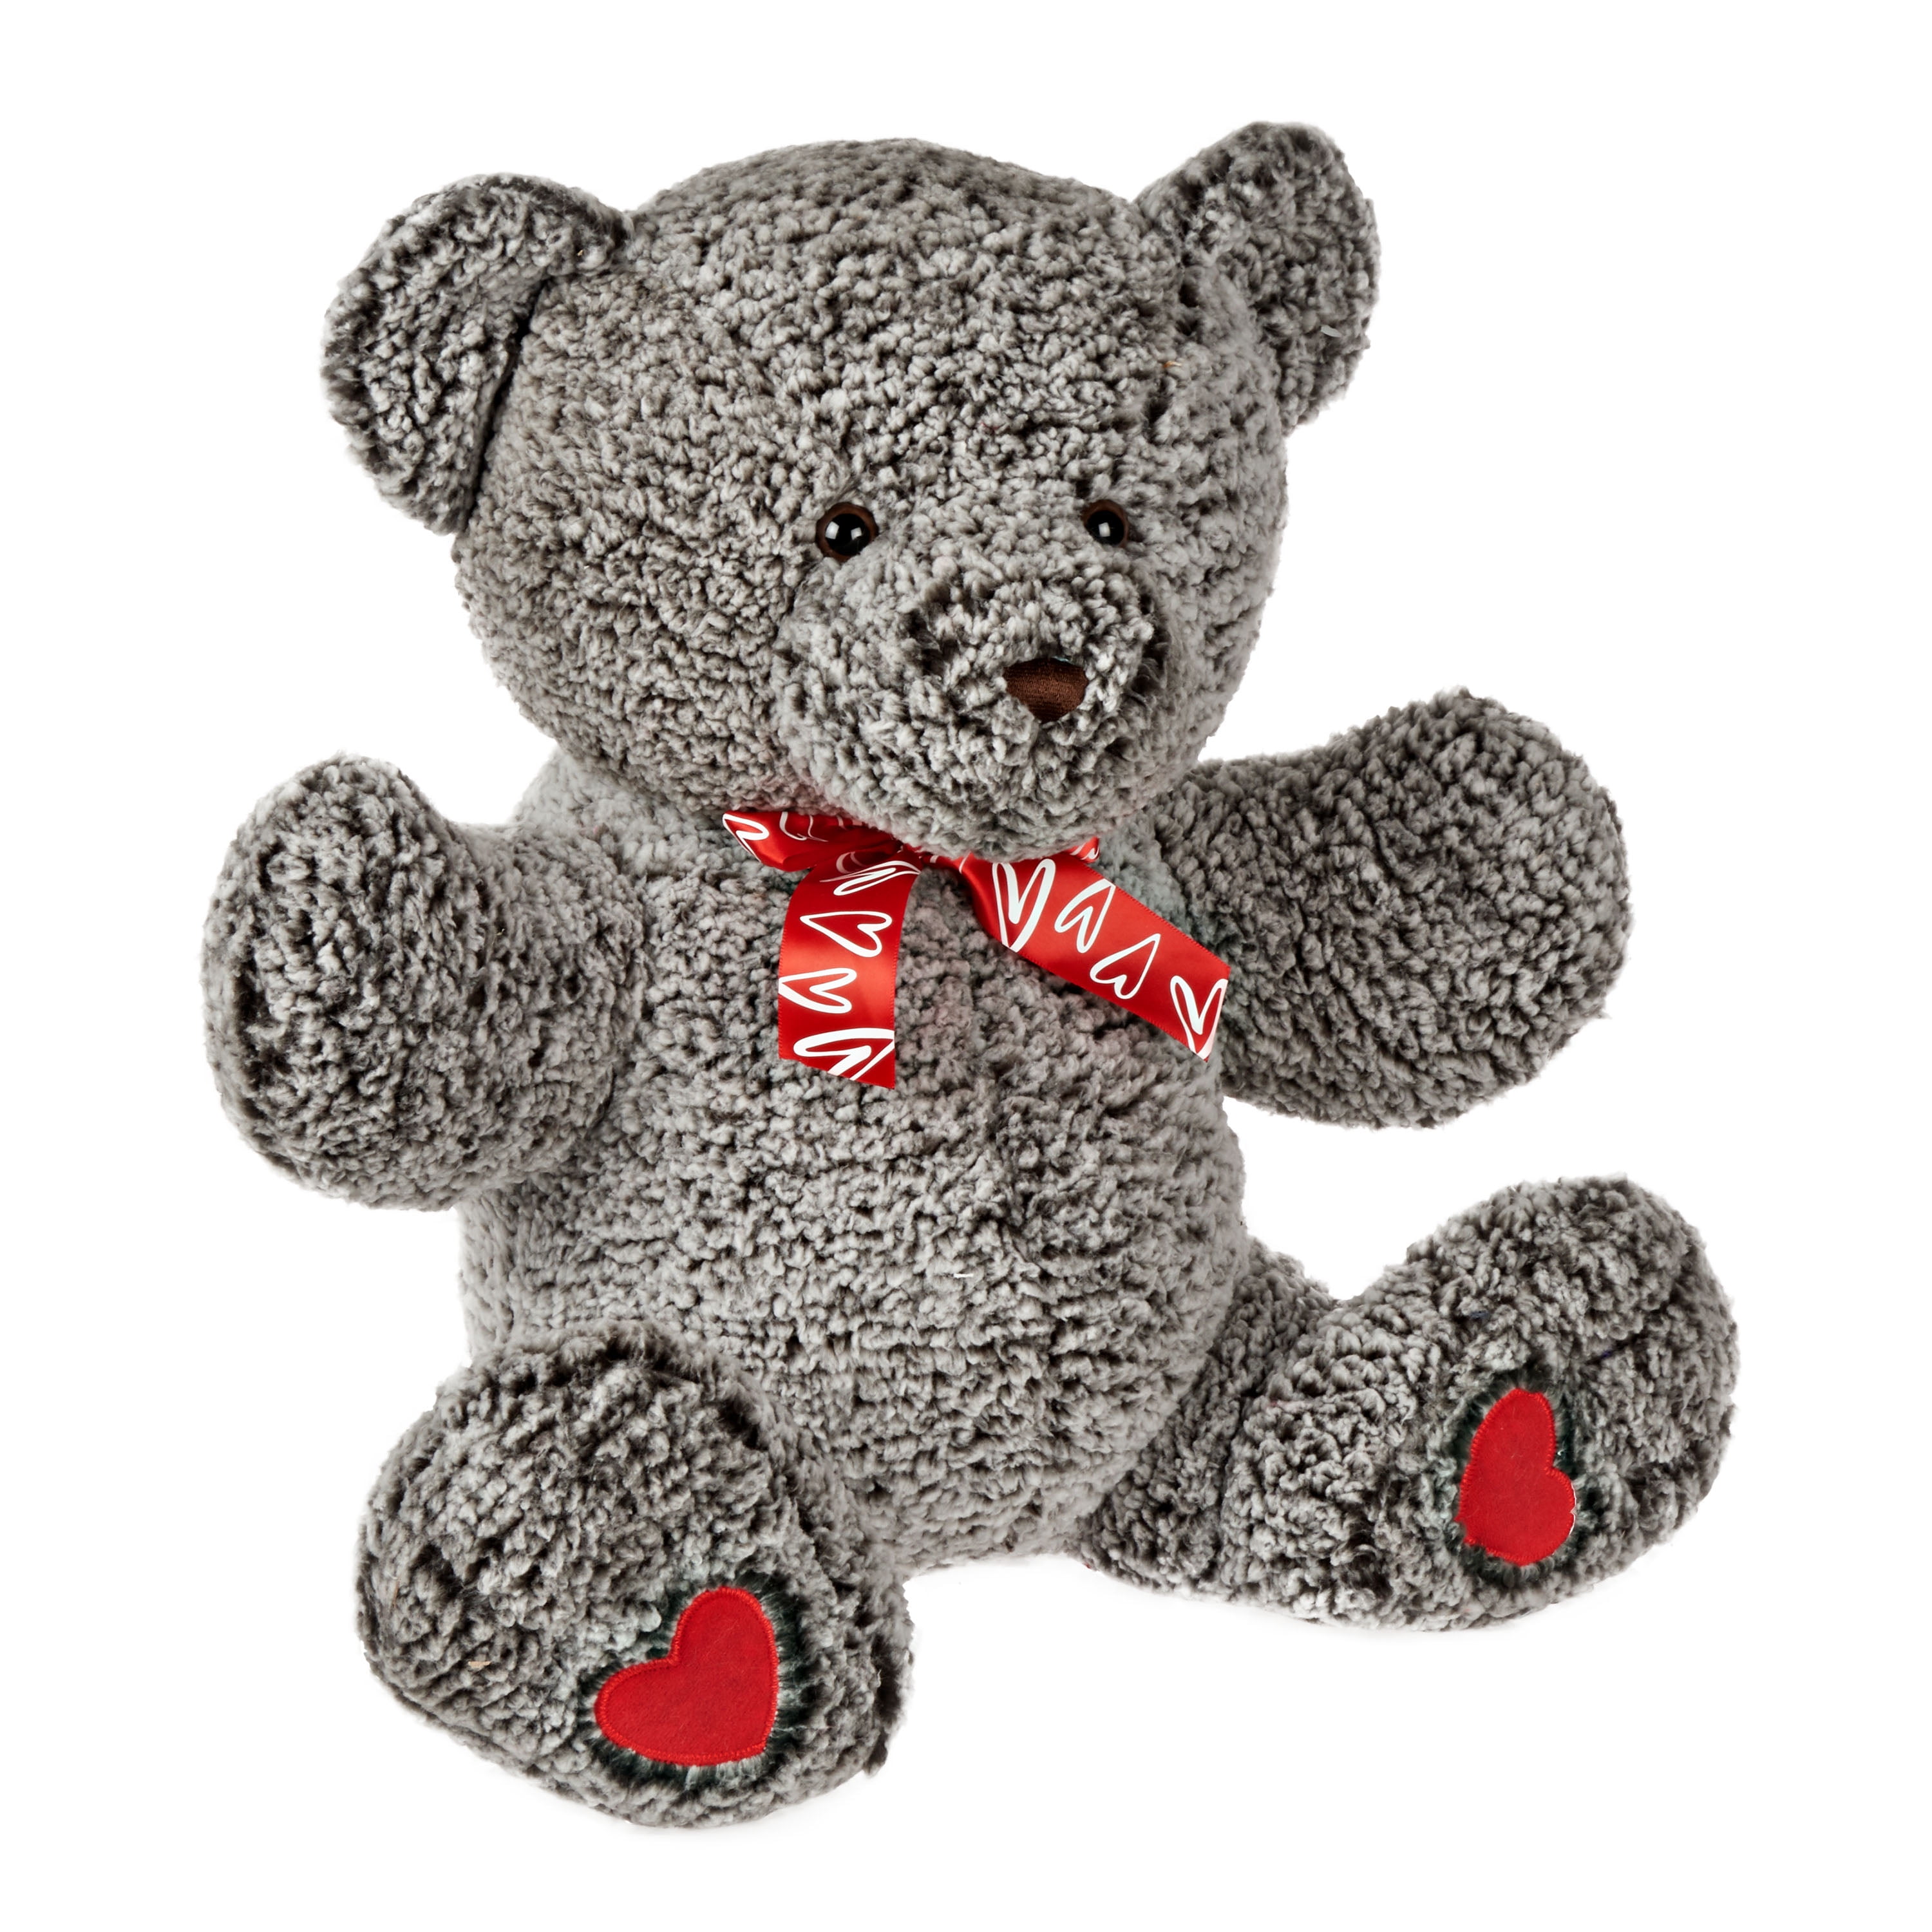 Record a 20 Second Message in a Black and White Dog Gift Teddy Bear 25cm/10" 